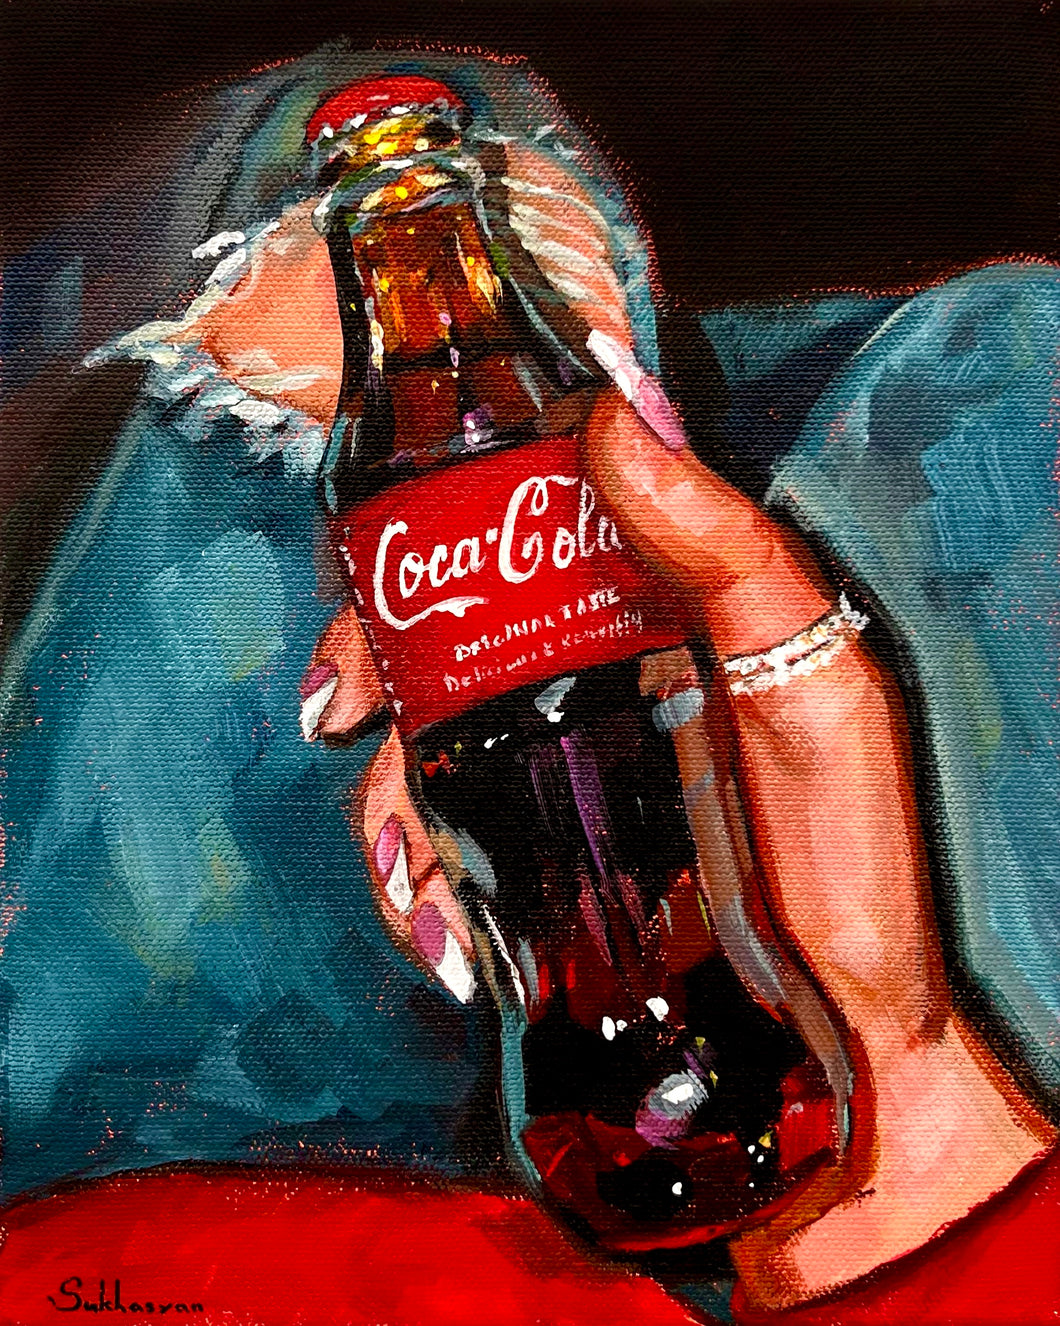 Archival giclée print of the Original acrylic painting Coca-Cola and Blue Jeans by Victoria Sukhasyan.